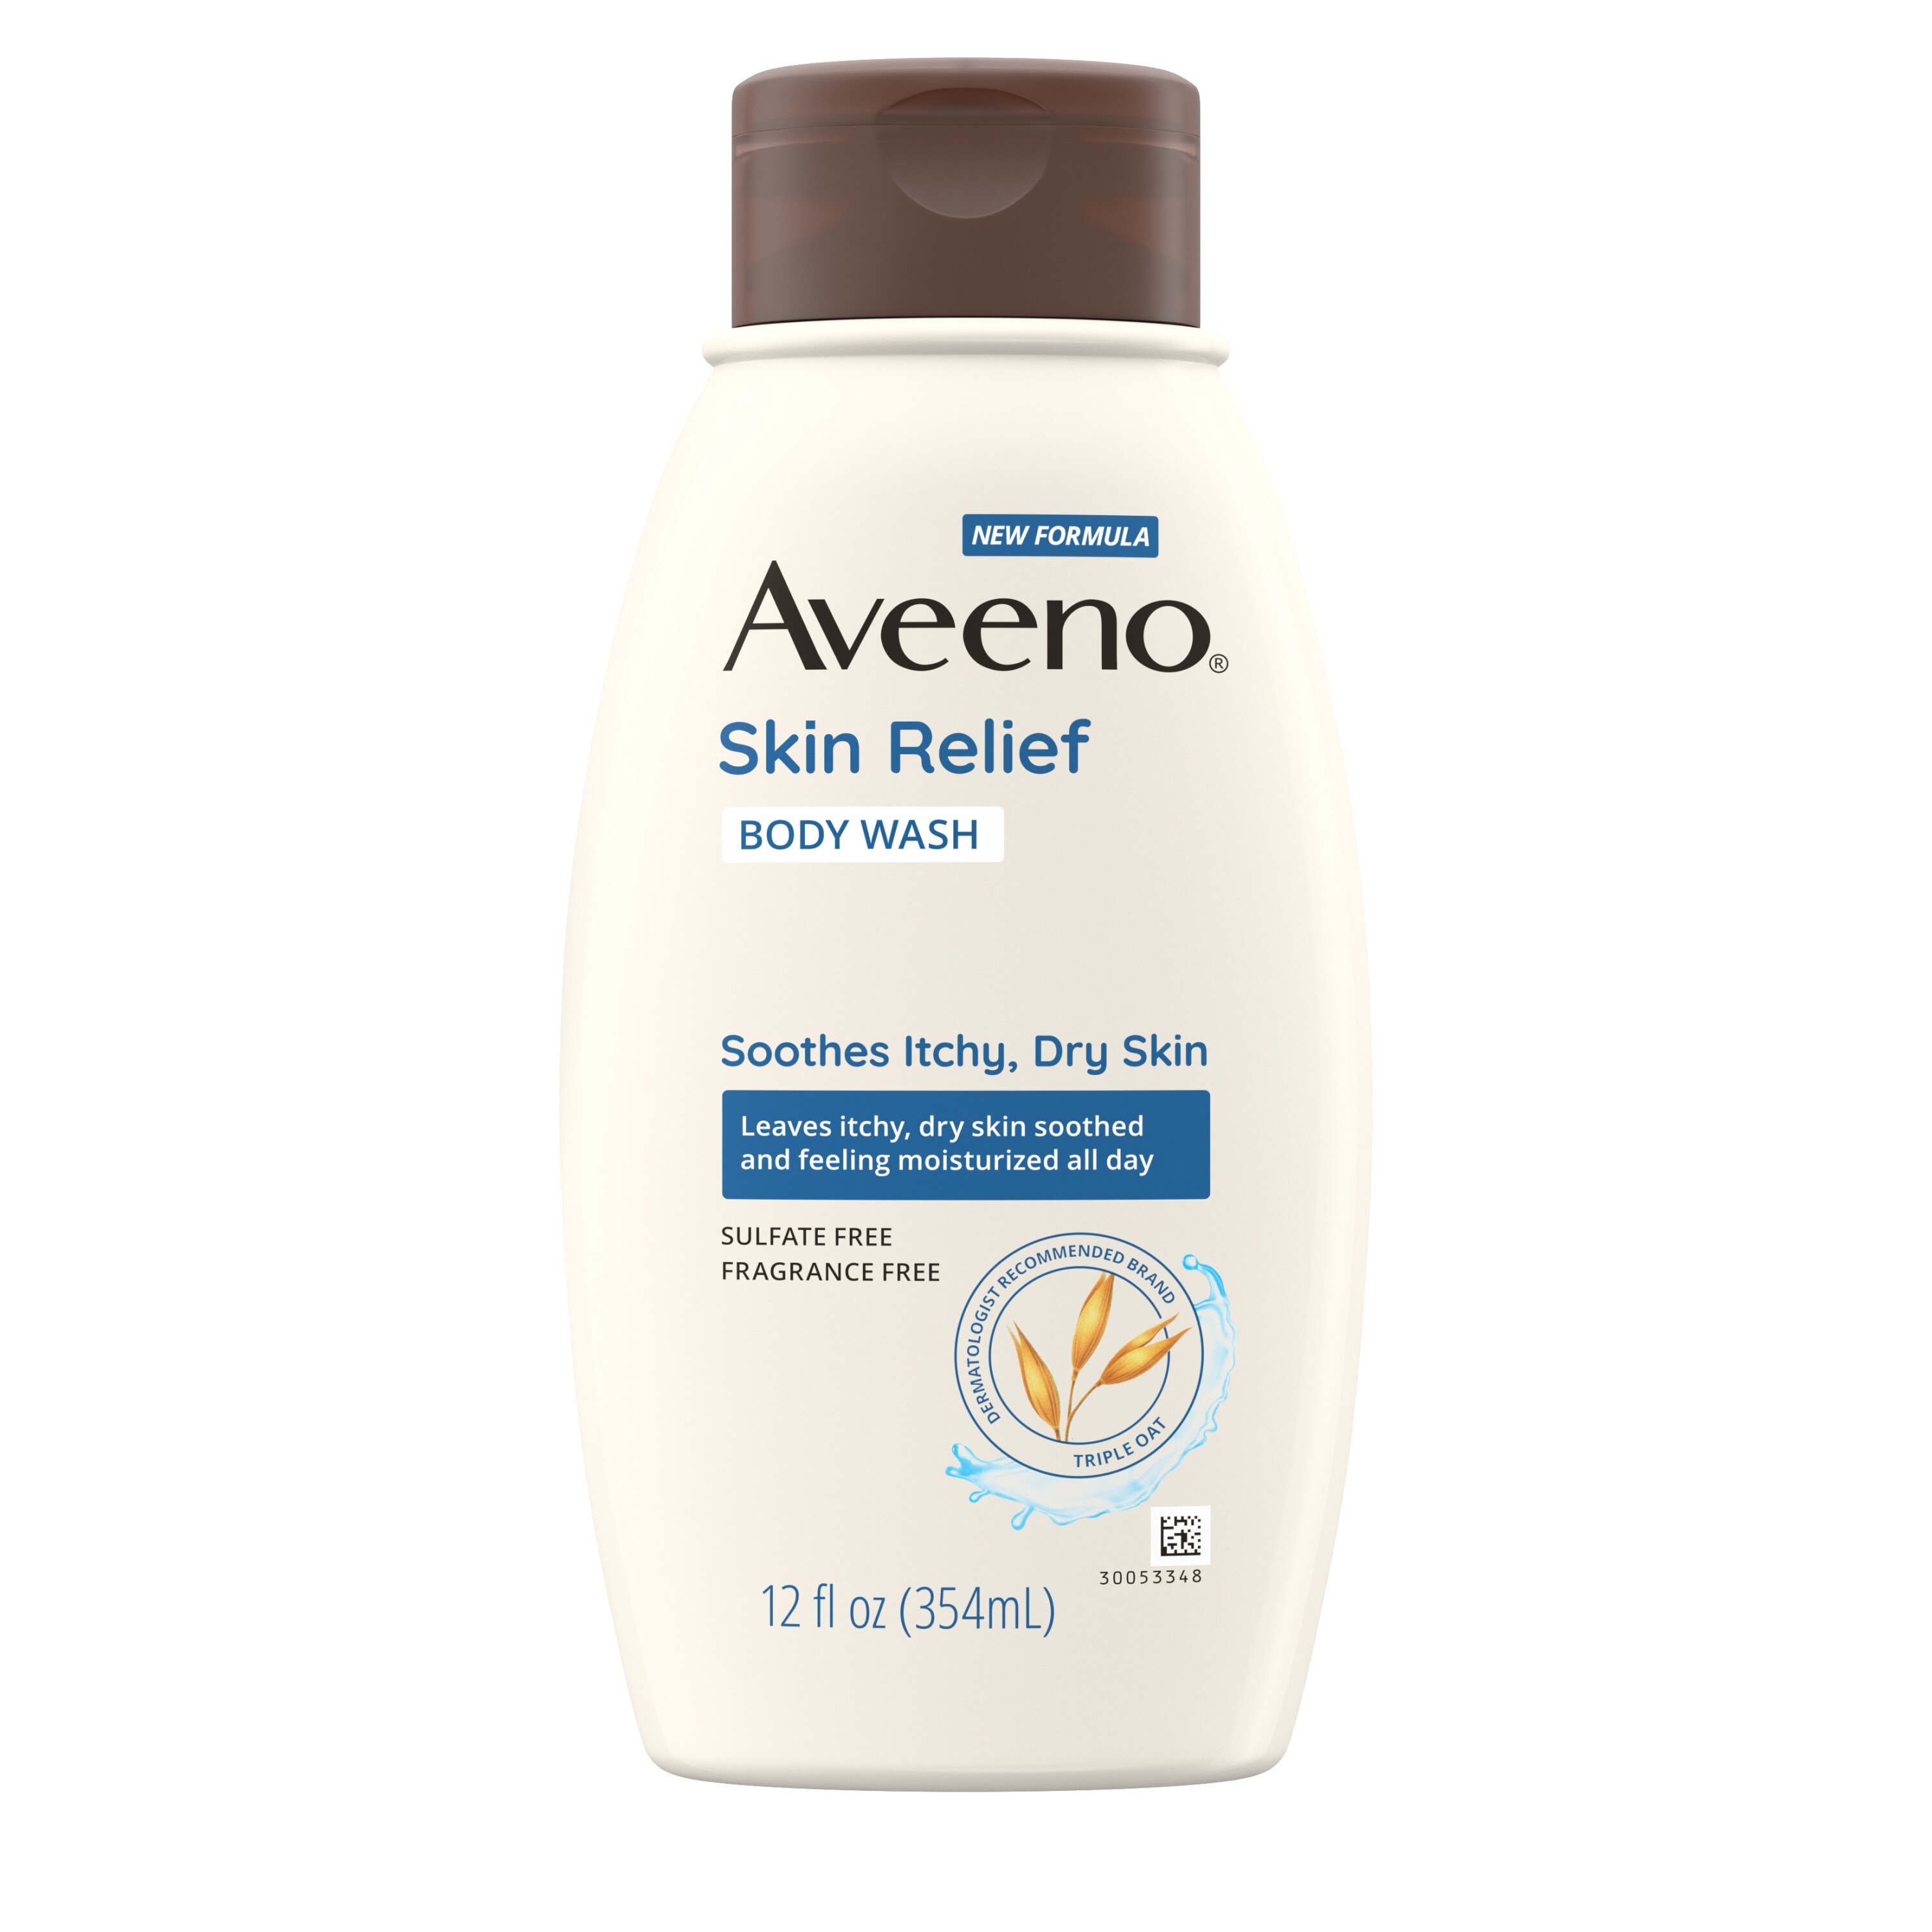 Aveeno Skin Relief Body Wash For Itchy, Dry Skin